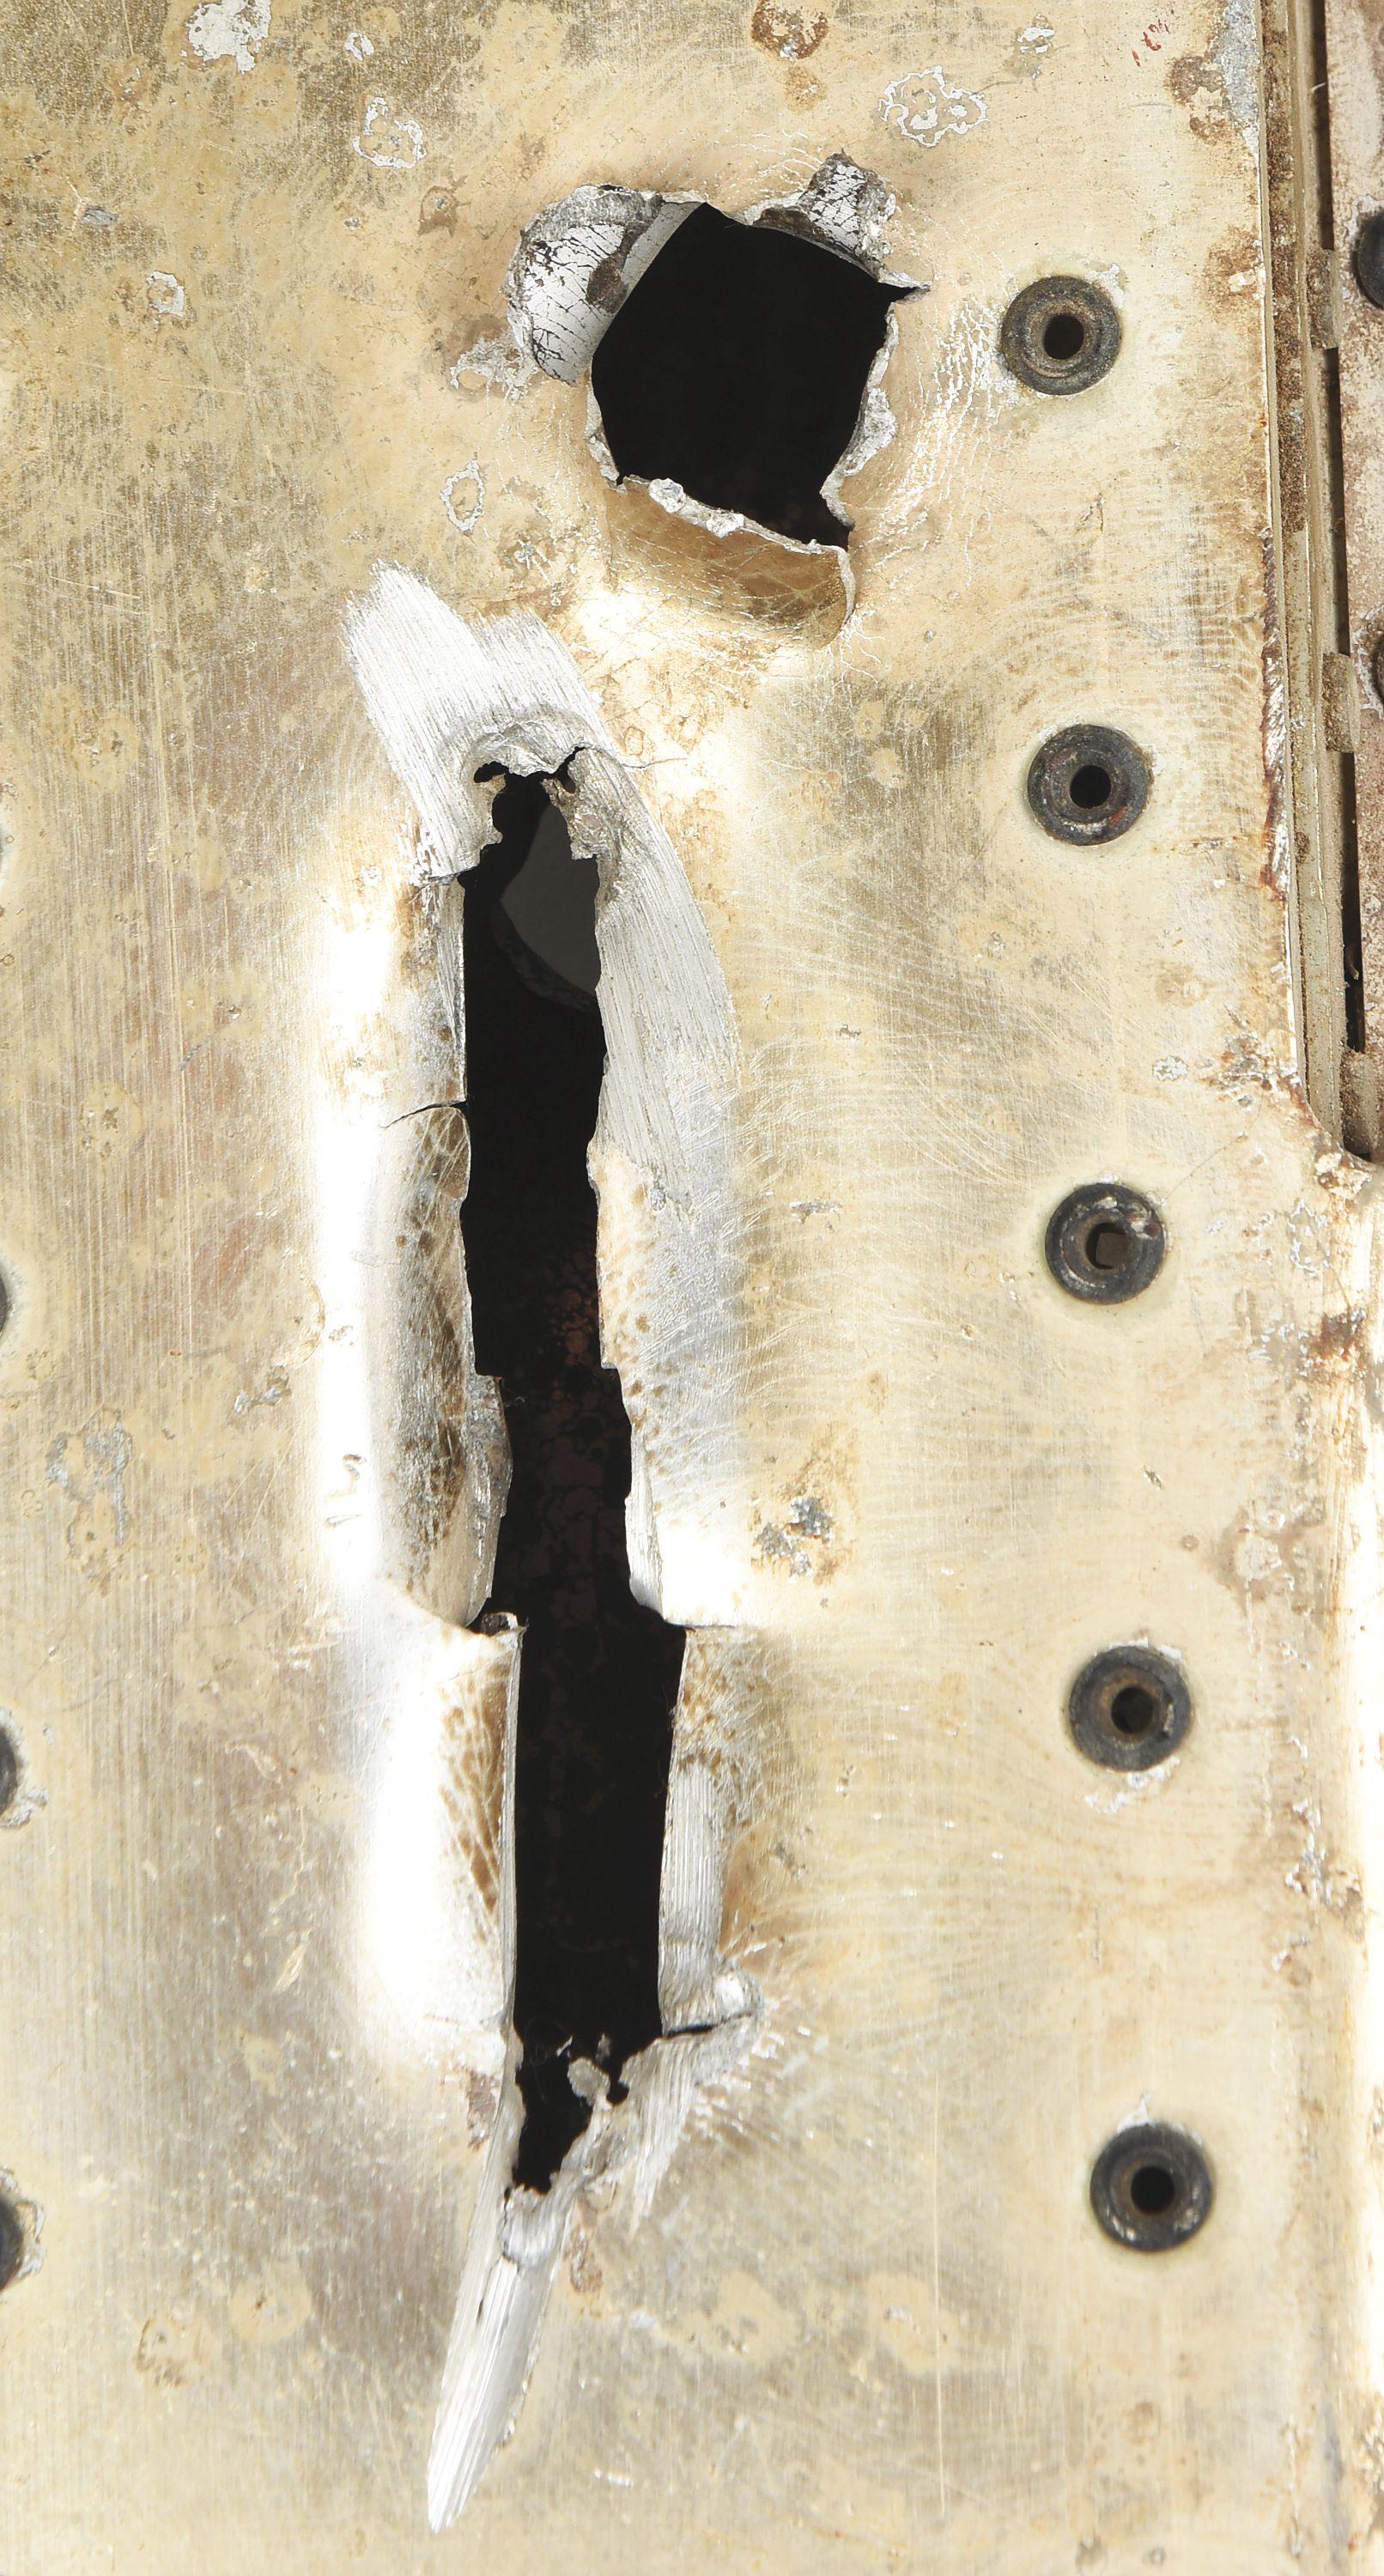 RECOVERED PANEL FROM A MESSERSCHMITT WITH BULLET HOLES.